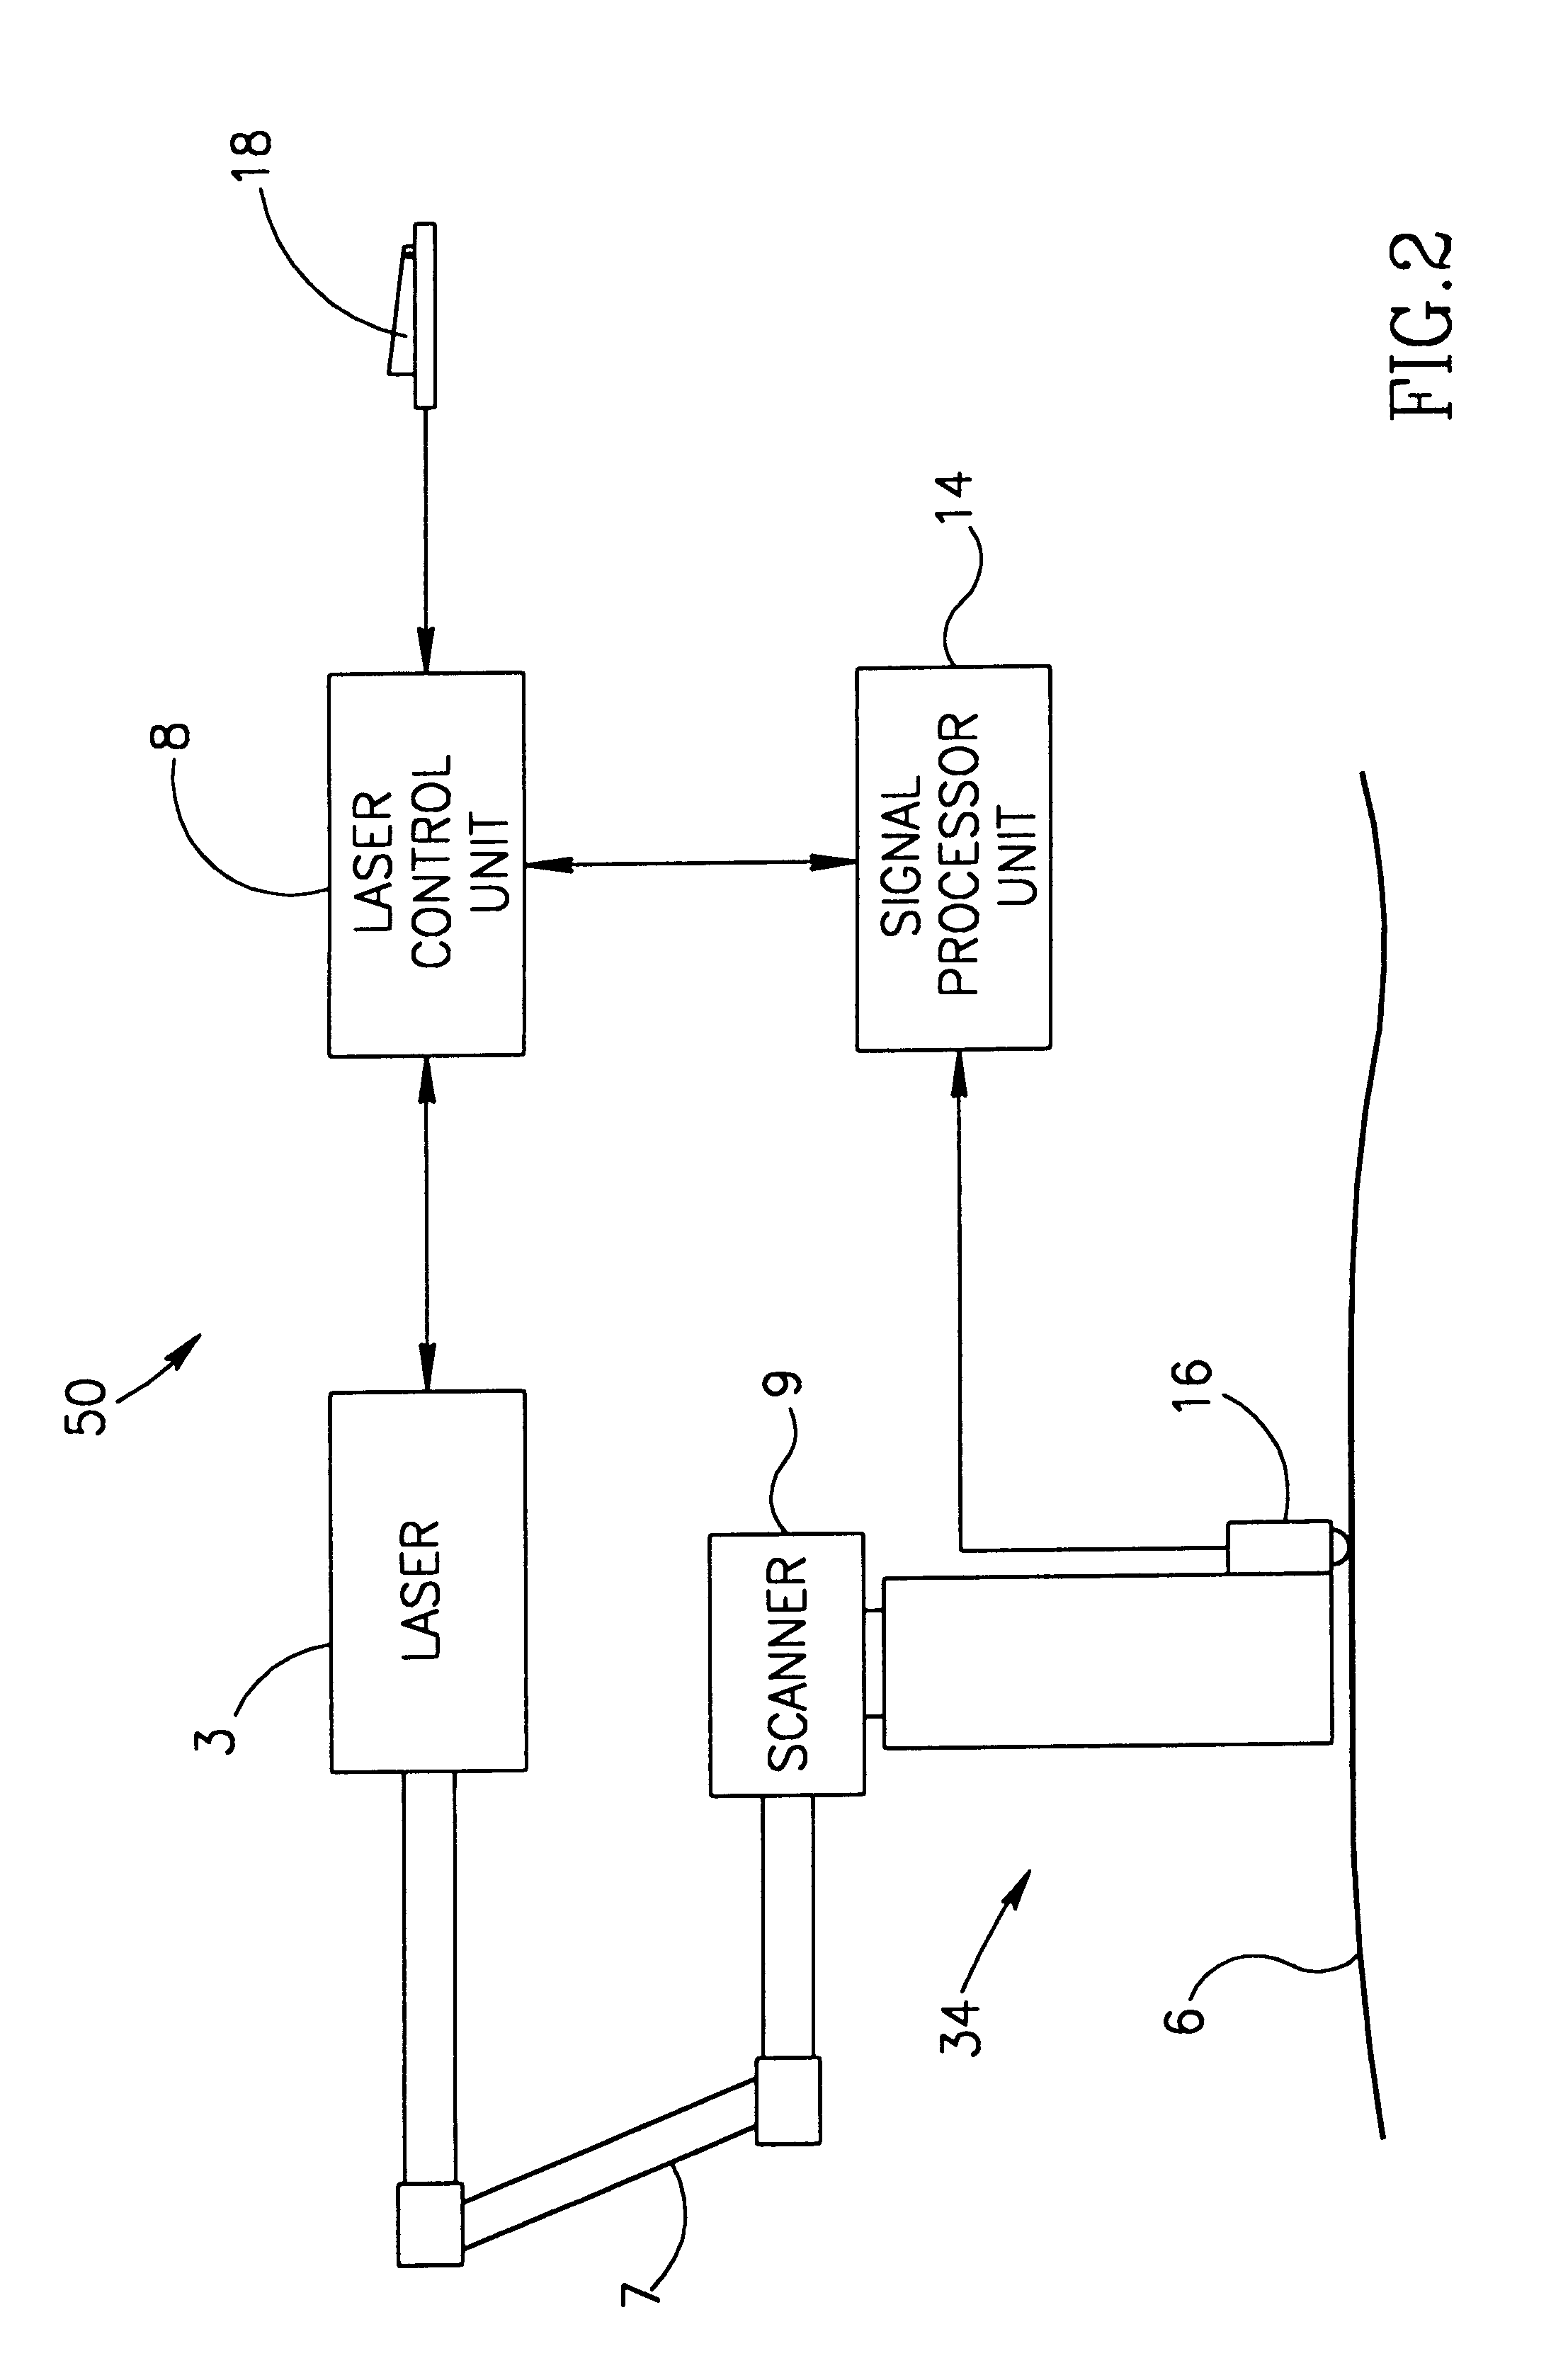 Apparatus and method including a handpiece for synchronizing the pulsing of a light source